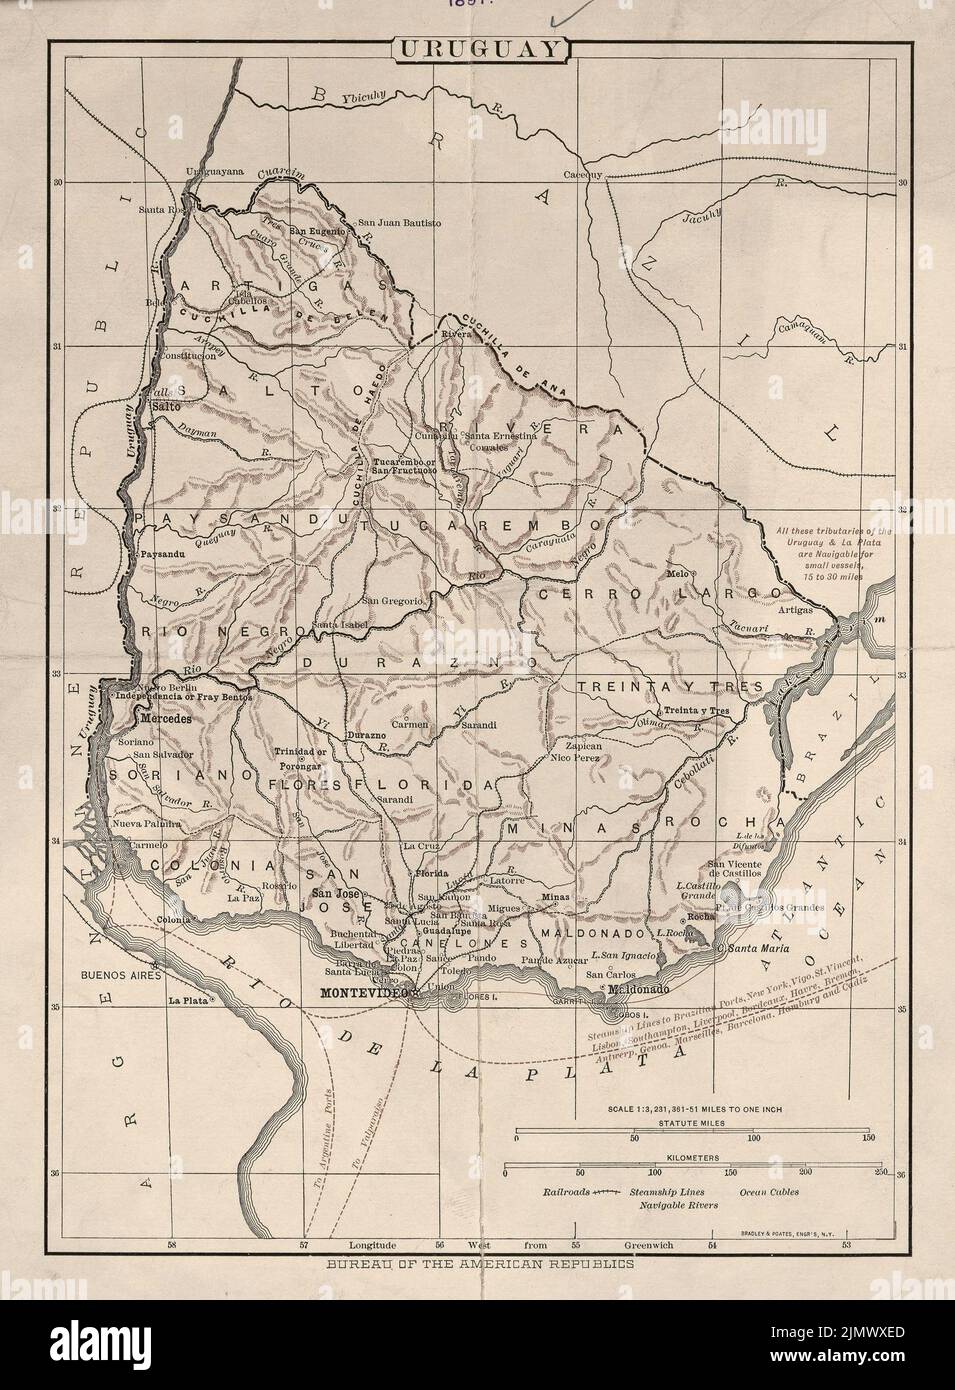 Vintage map of Uruguay in South America 1897 Stock Photo